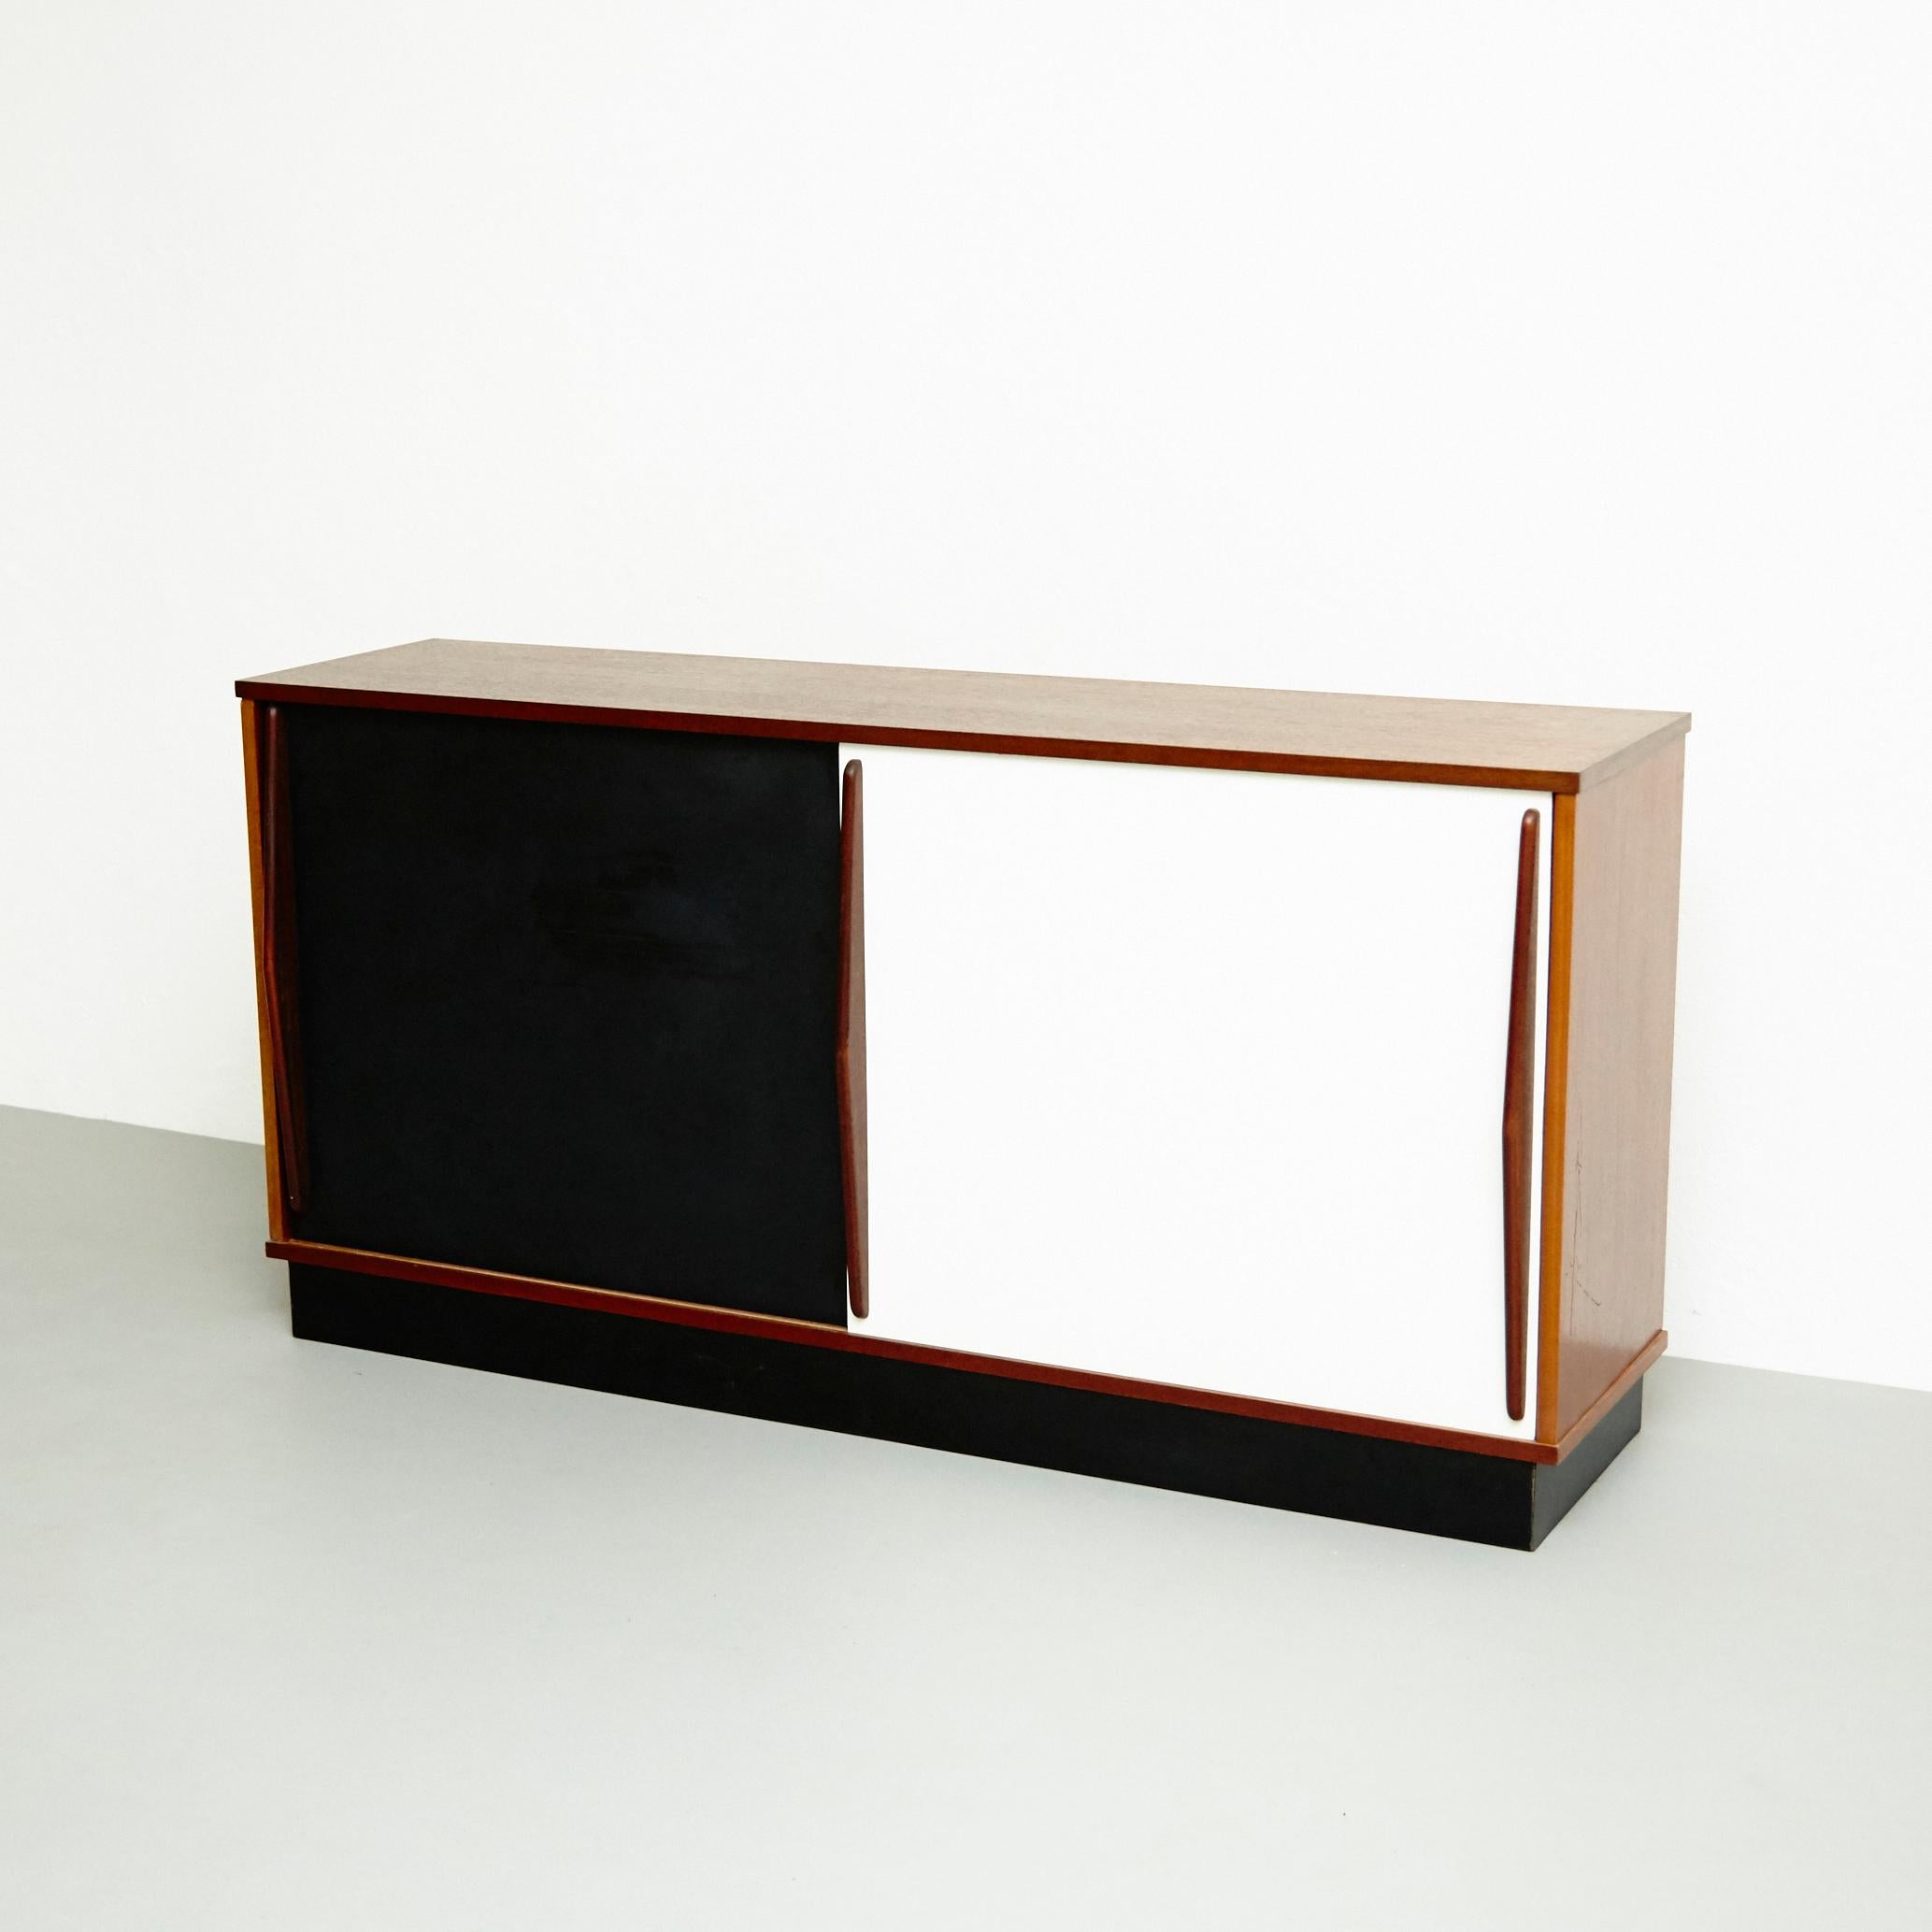 French Charlotte Perriand Mid-Century Modern Cansado Wood Sideboard, circa 1950